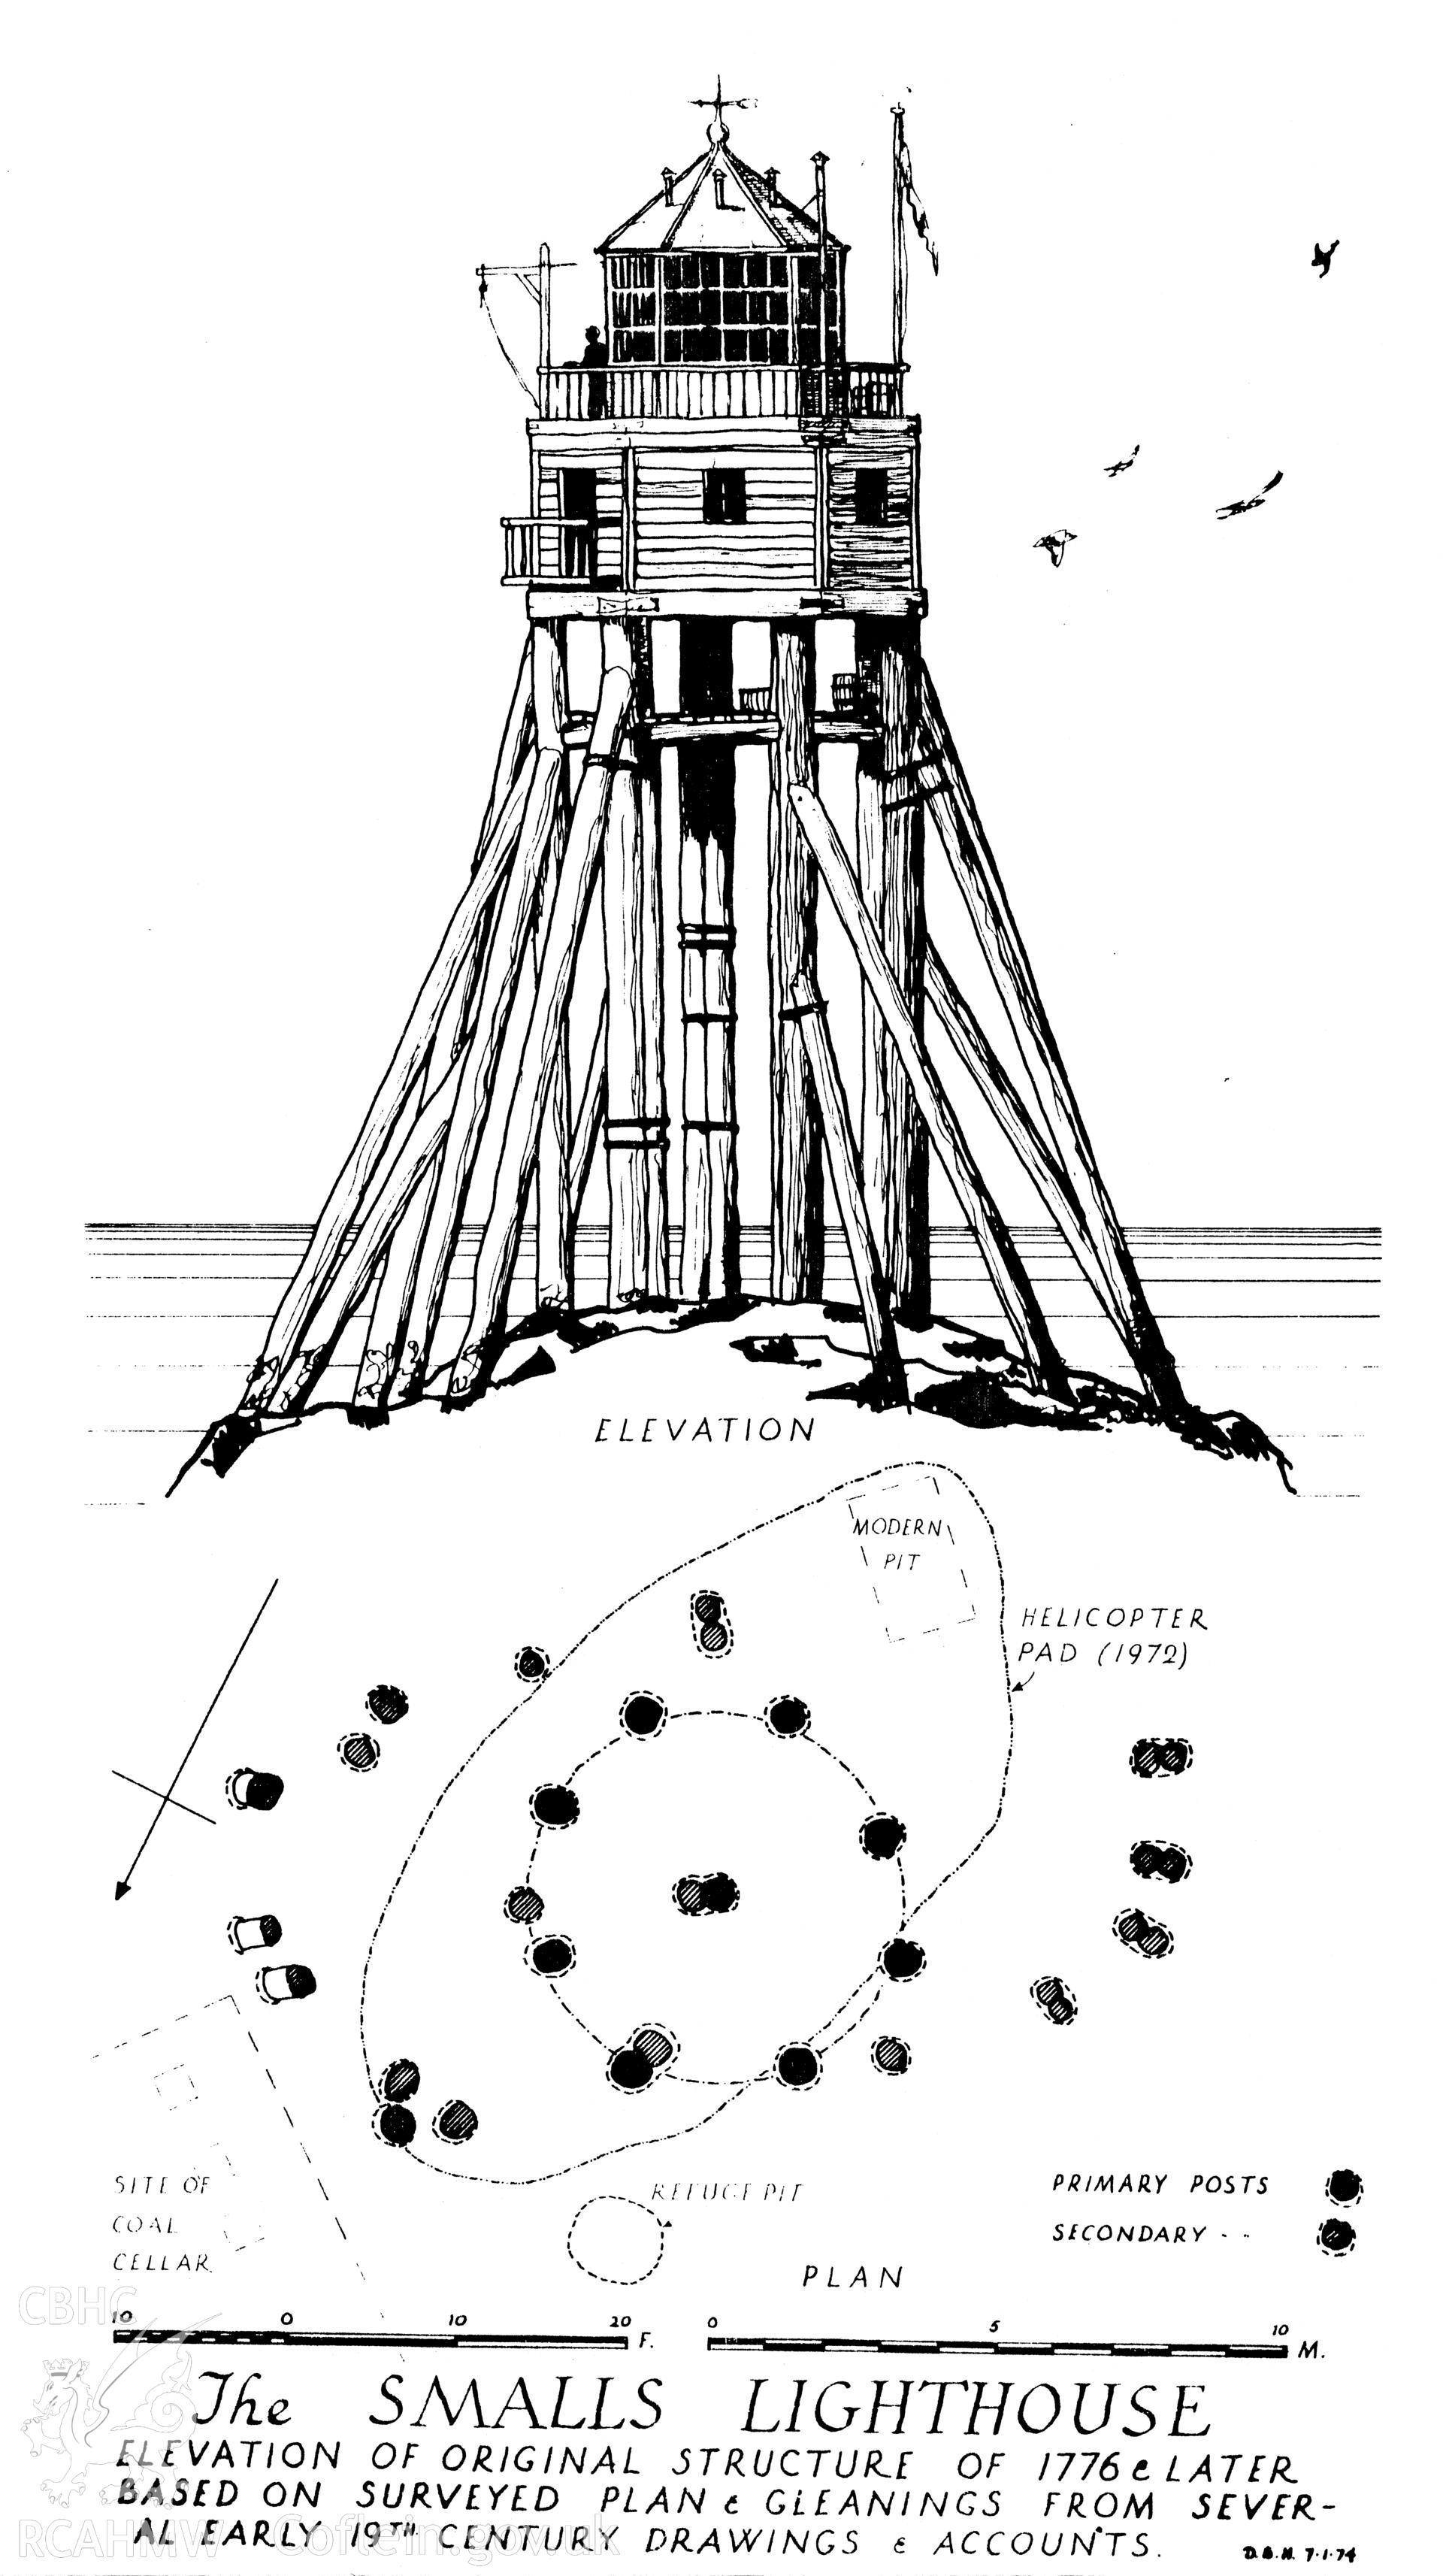 Copy of a drawing showing elevation of Smalls Lighthouse.